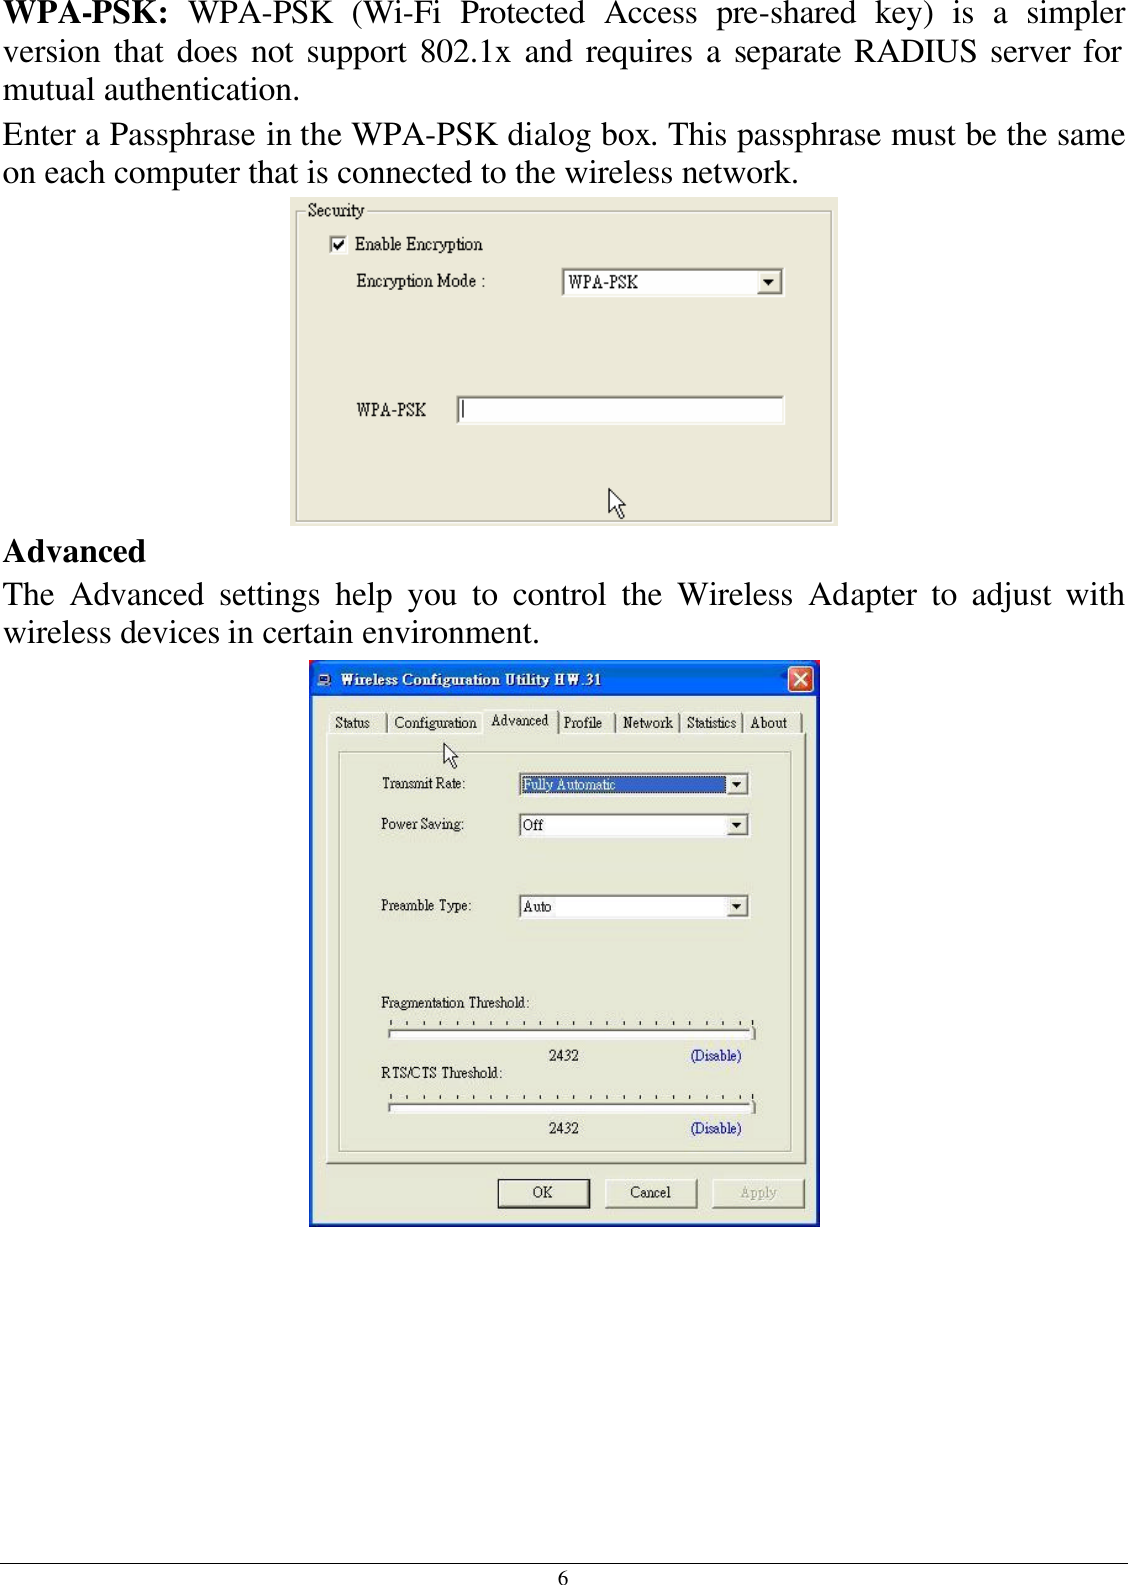 6 WPA-PSK:  WPA-PSK (Wi-Fi Protected Access pre-shared key) is a simpler version that does not support 802.1x and requires a separate RADIUS server for mutual authentication. Enter a Passphrase in the WPA-PSK dialog box. This passphrase must be the same on each computer that is connected to the wireless network.  Advanced The Advanced settings help you to control the Wireless Adapter to adjust with wireless devices in certain environment.  